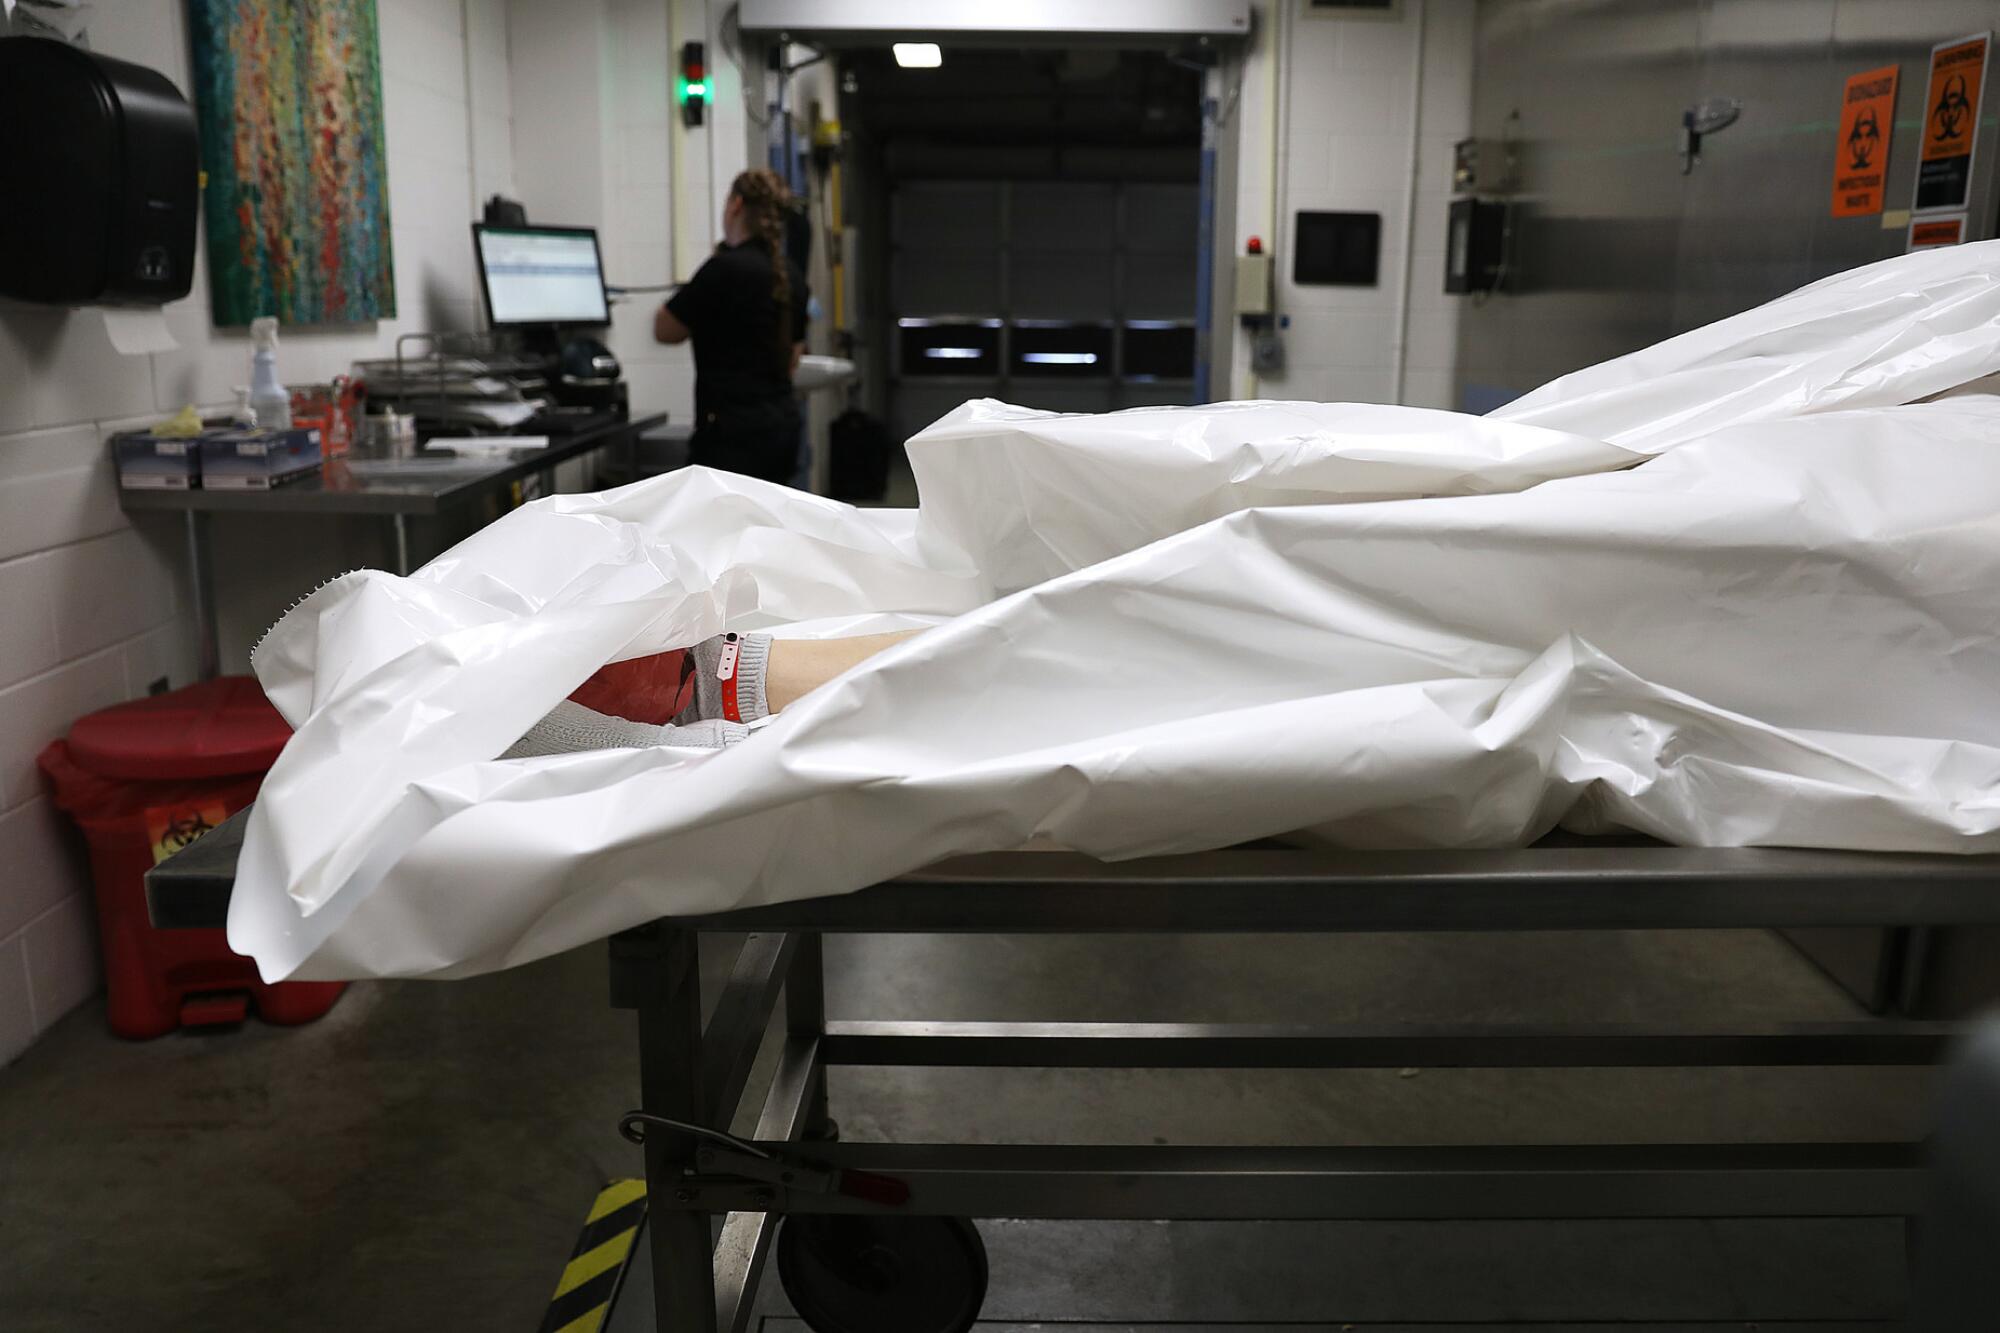 A body at the Pierce County medical examiner's office in Tacoma, Wash.